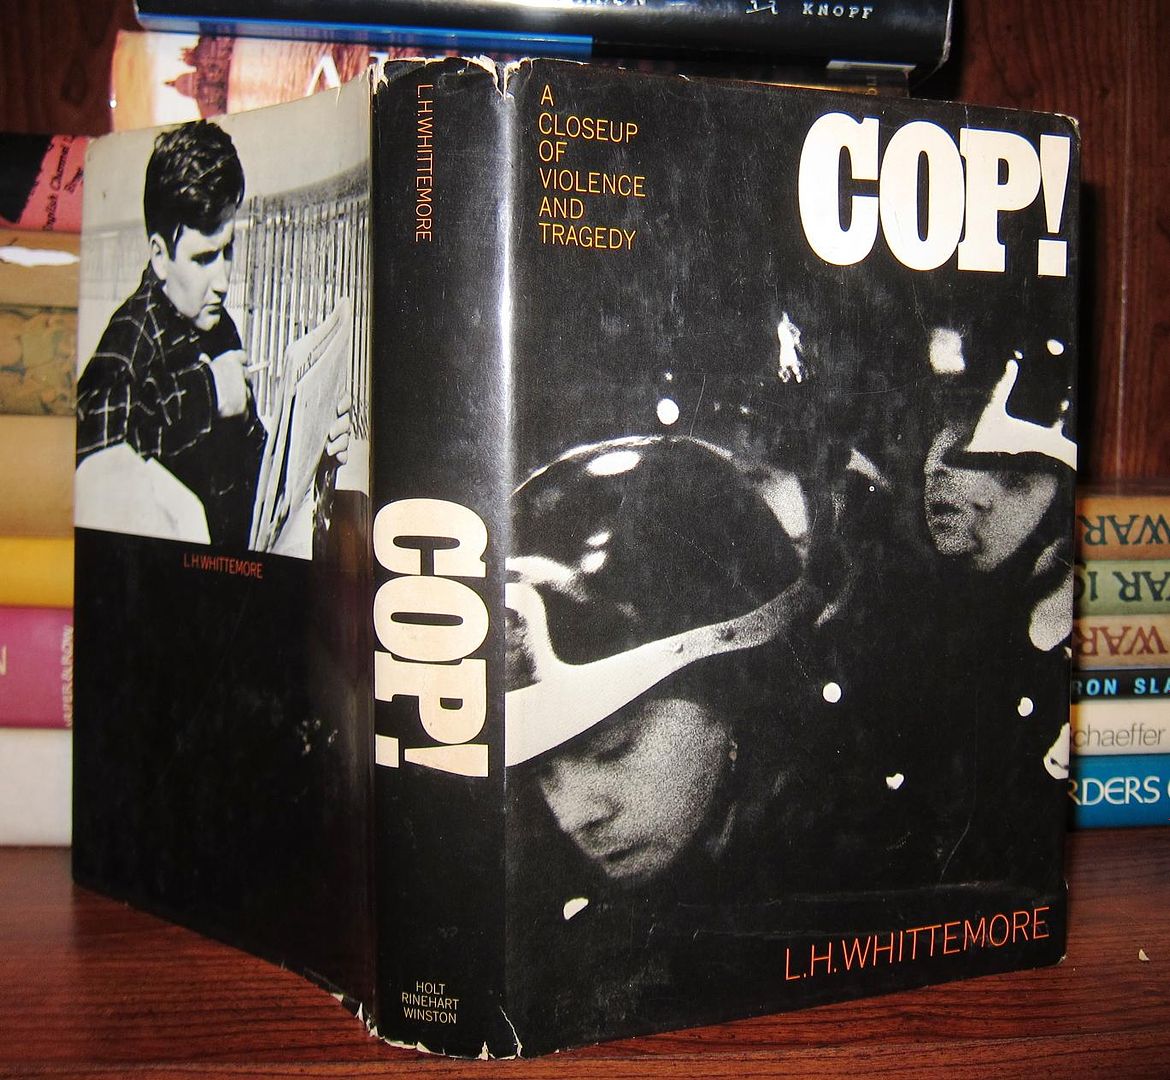 WHITTEMORE, L. H - Cop! a Closeup of Violence and Tragedy